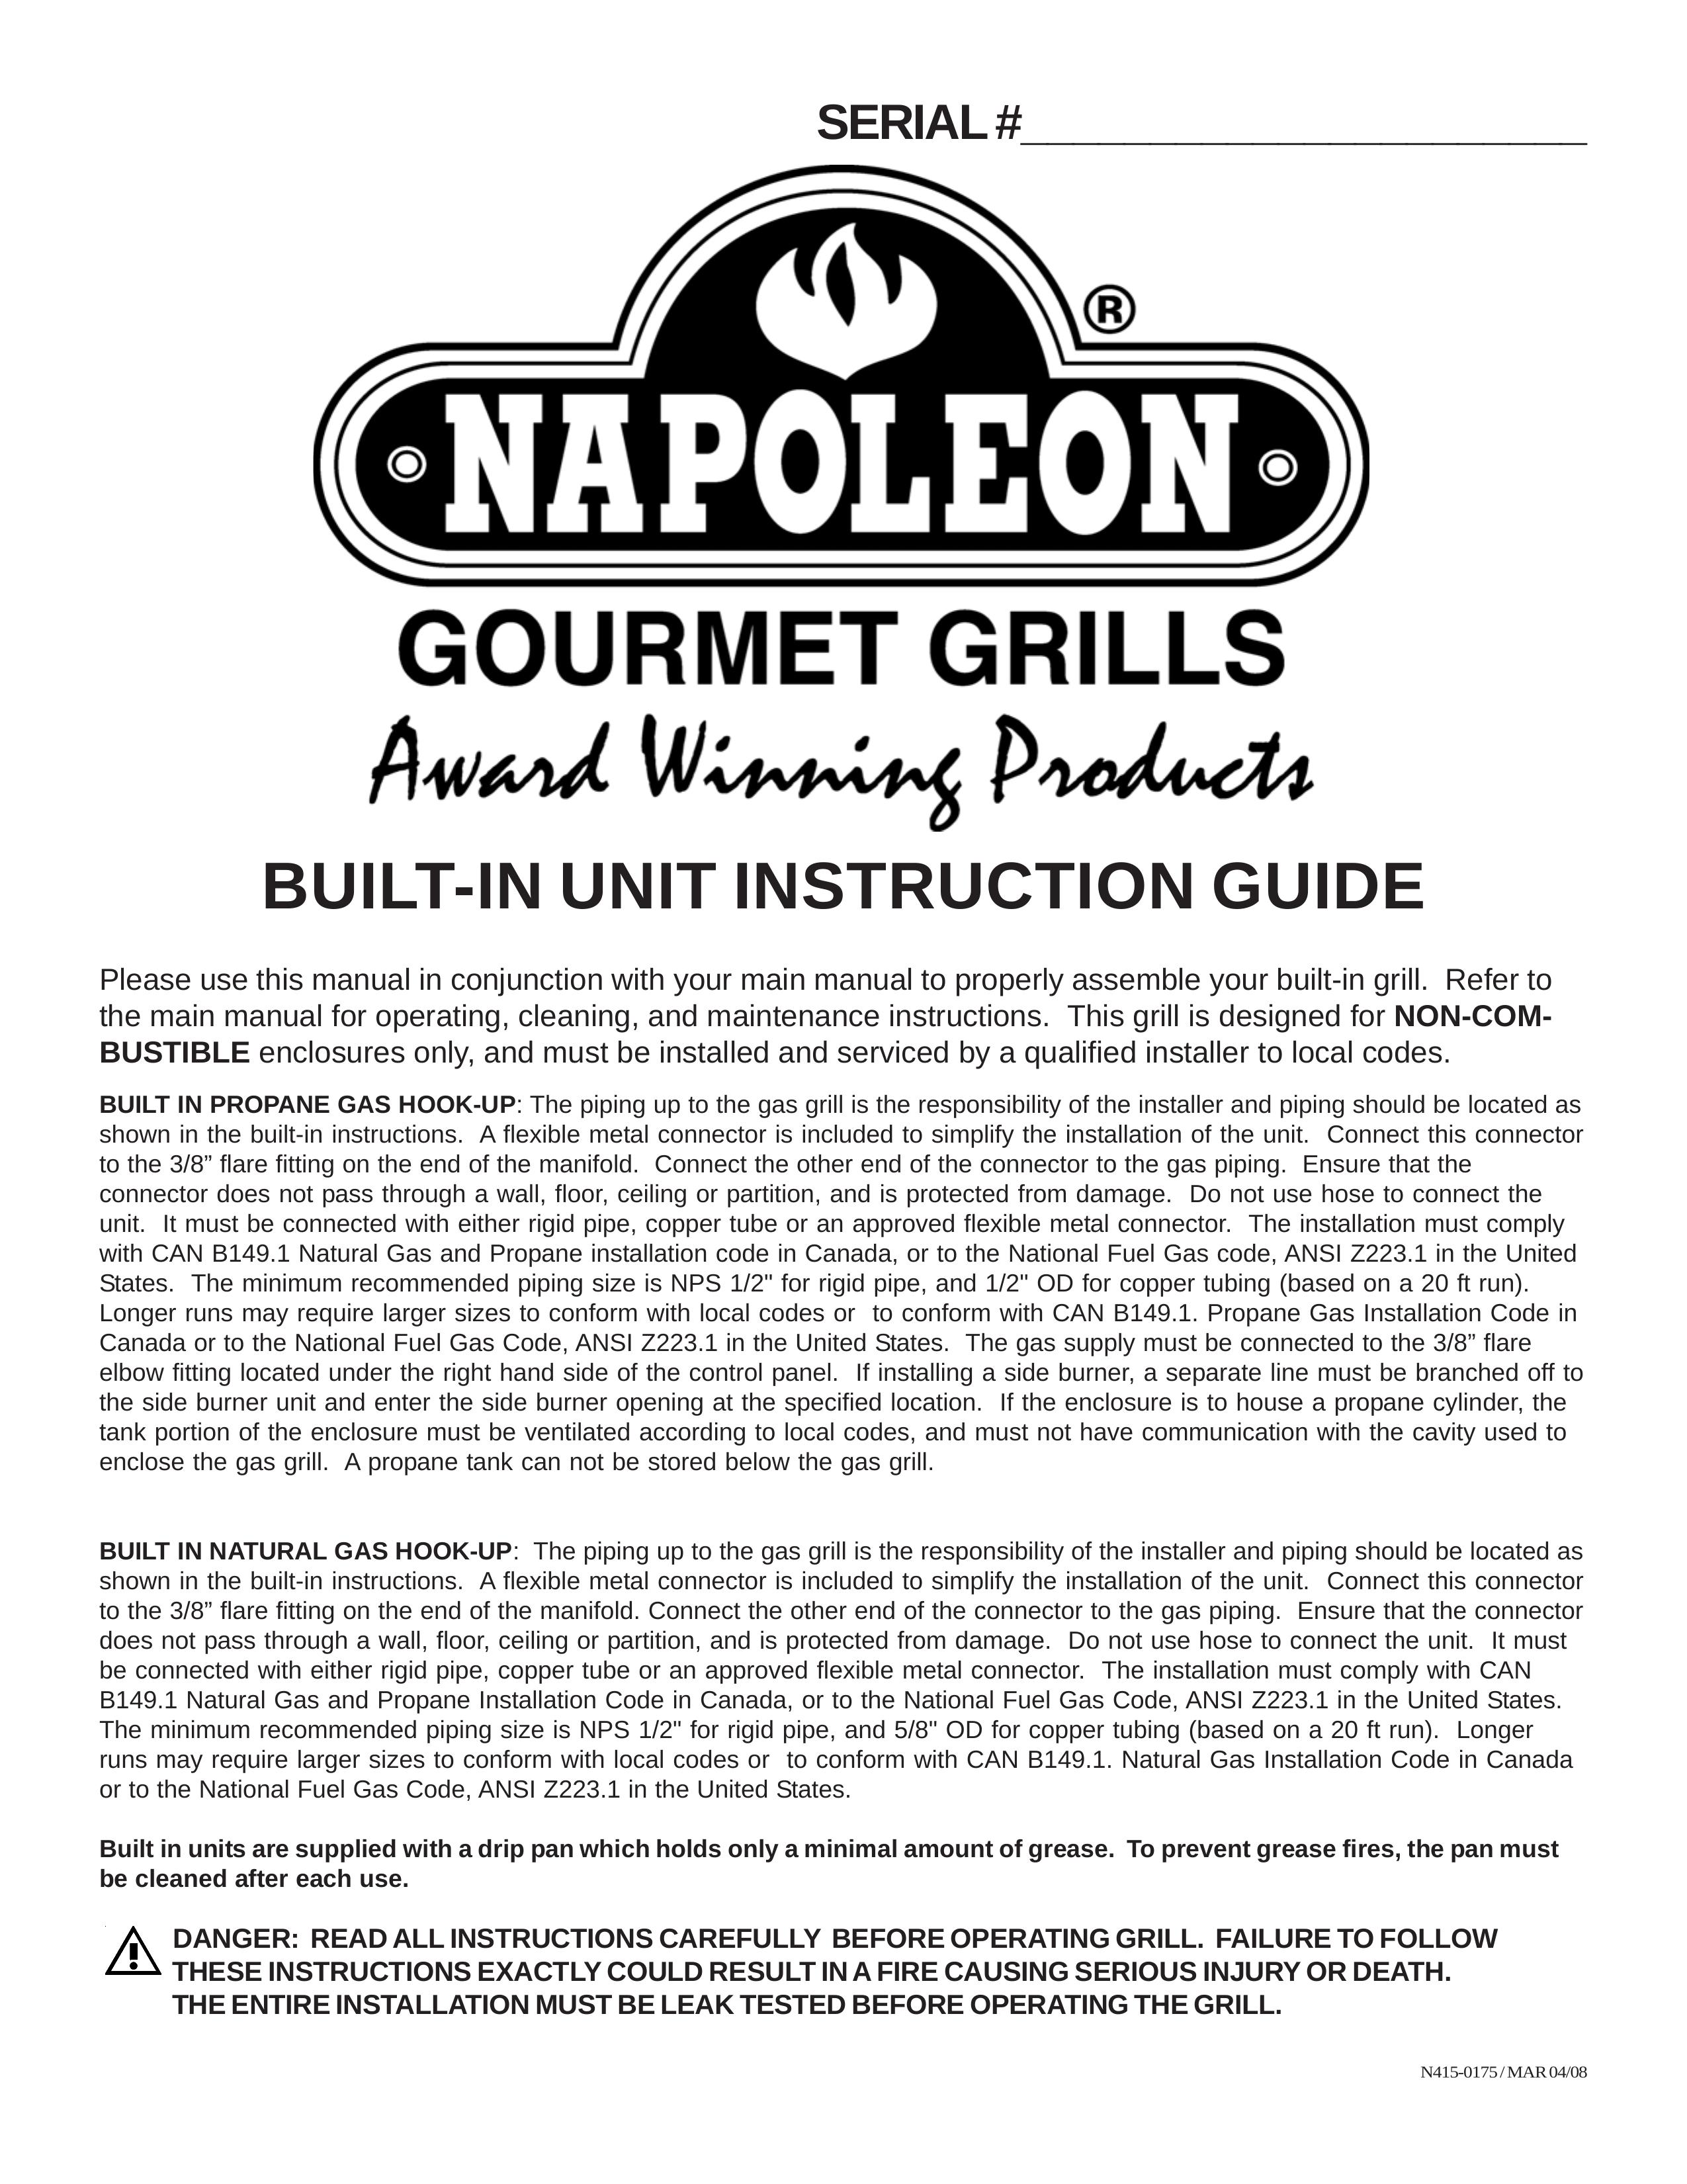 Napoleon Grills Gourmet Grill Gas Grill User Manual